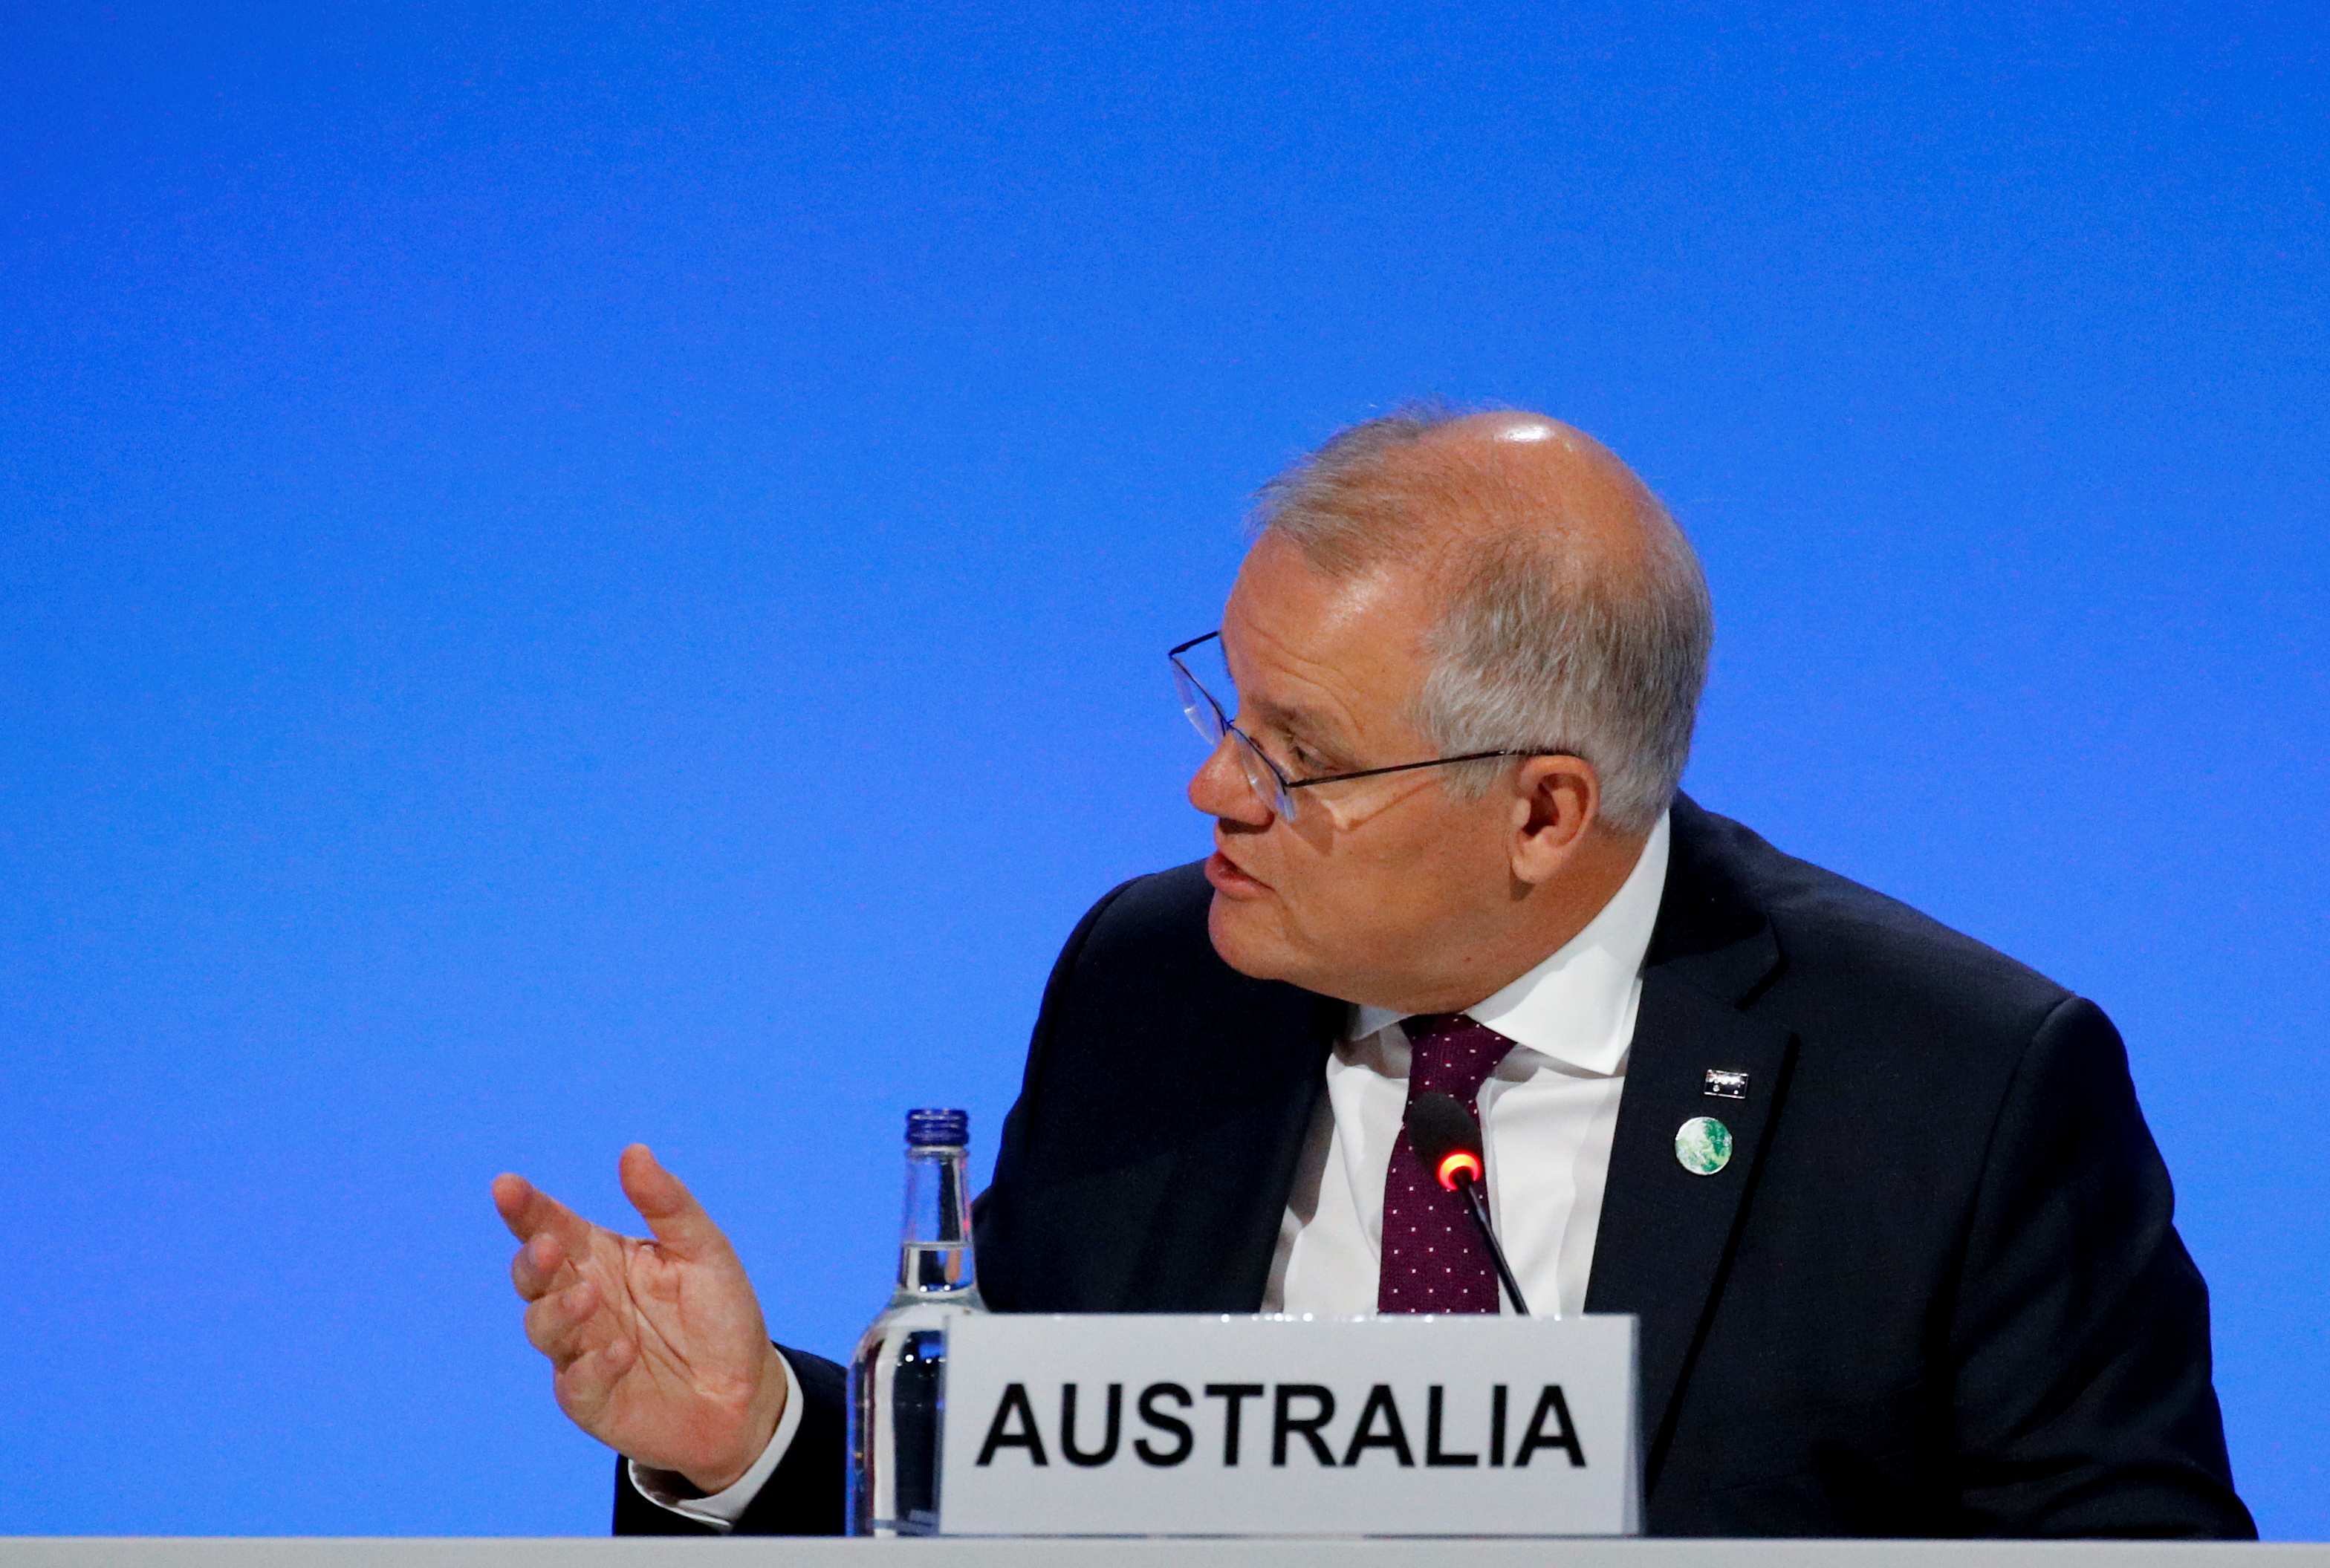 Australia's Prime Minister Scott Morrison attends a meeting during the UN Climate Change Conference (COP26) in Glasgow, Scotland, Britain, November 2, 2021. REUTERS/Phil Noble/Pool